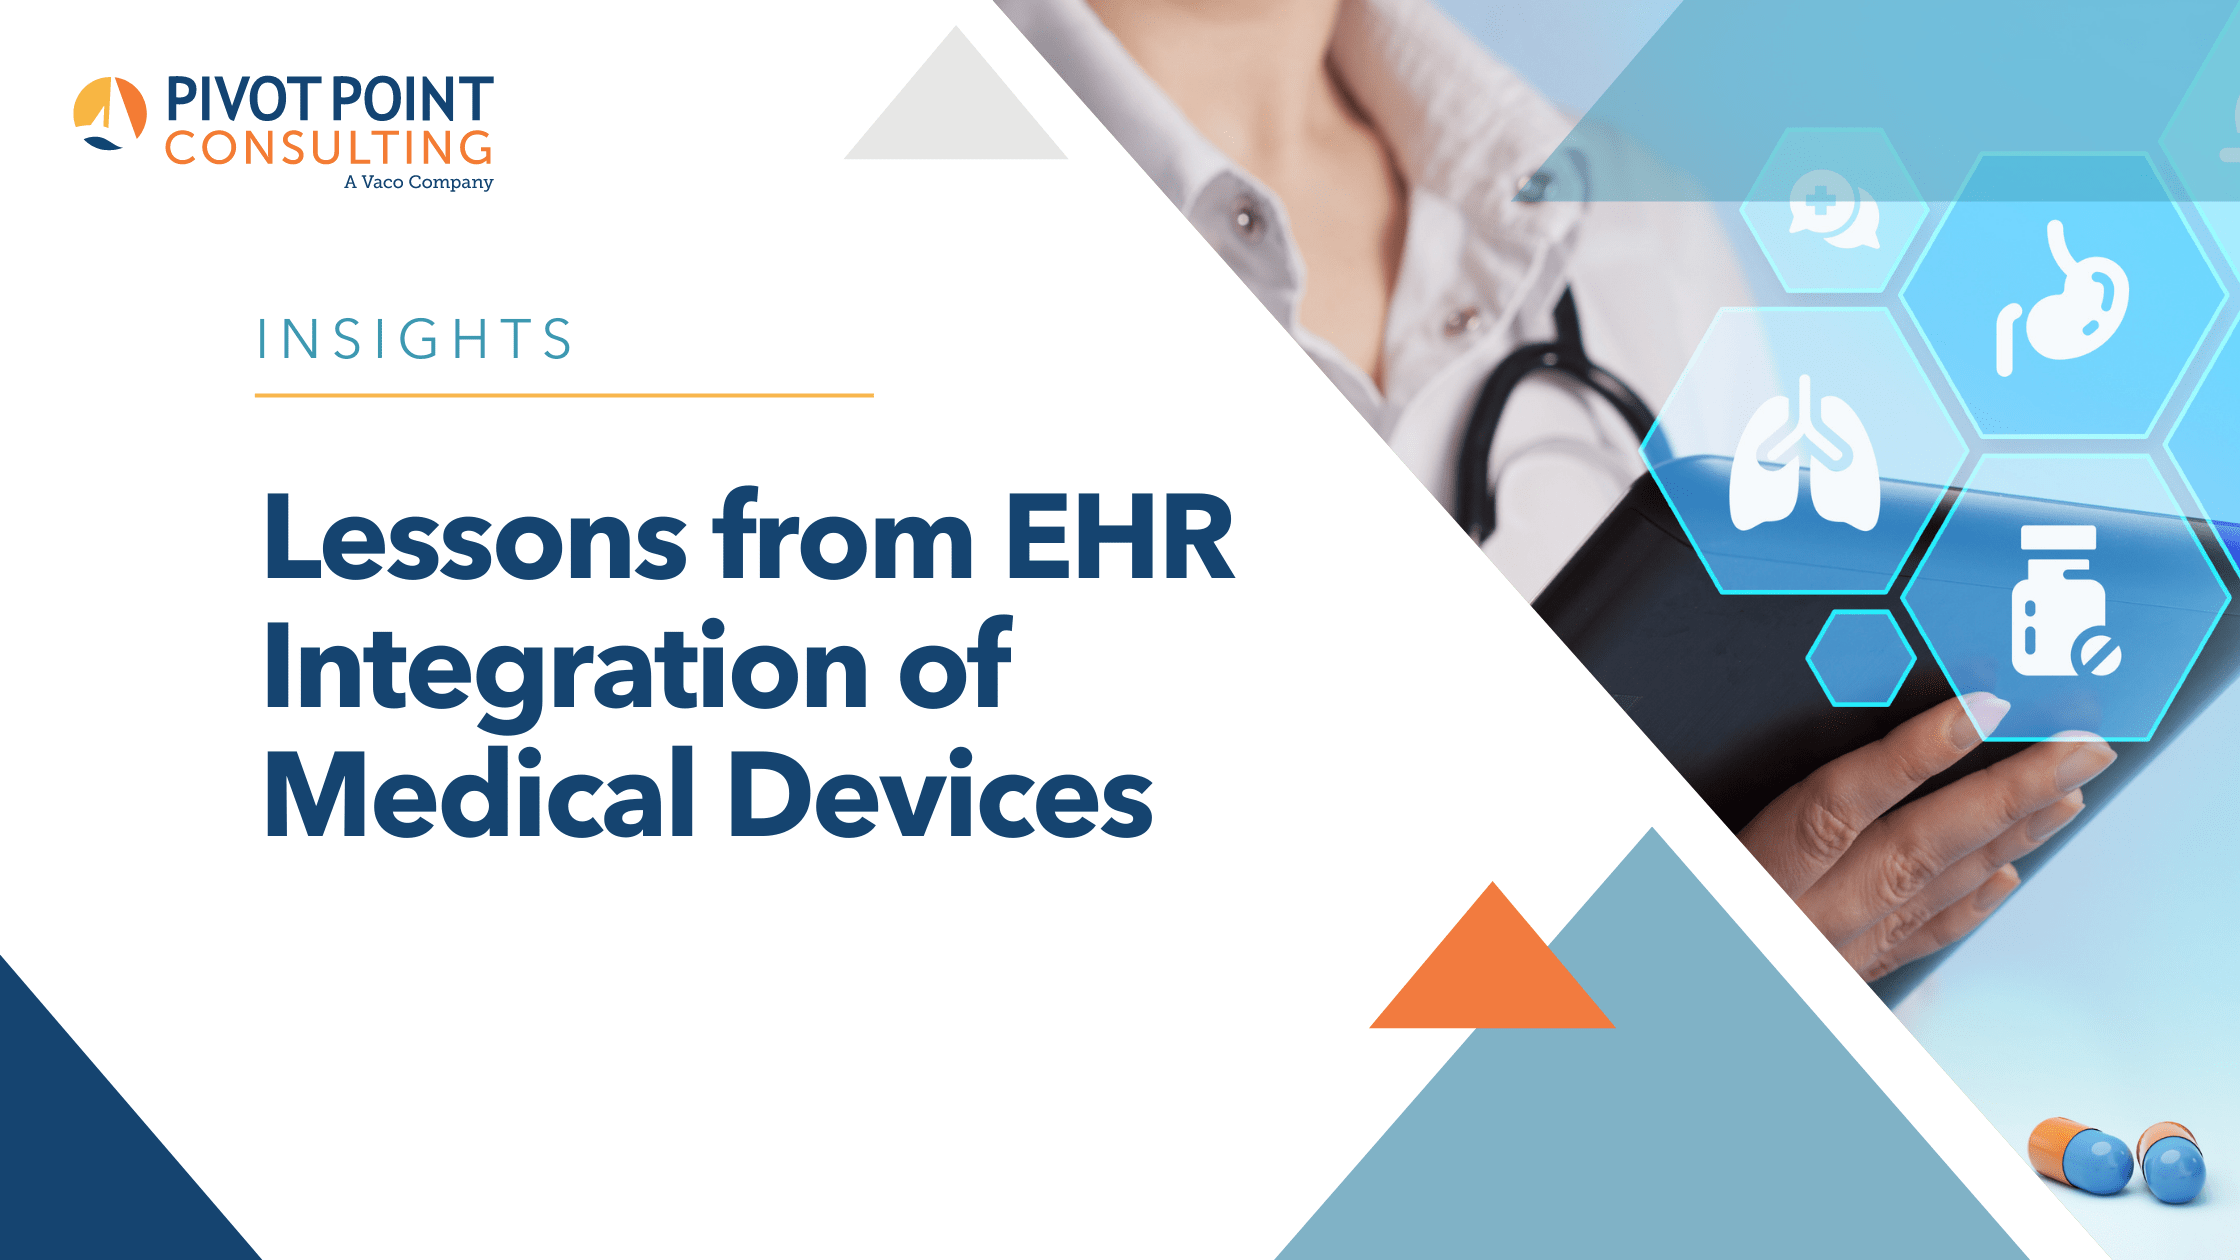 Lessons from EHR Integration of Medical Devices blog post